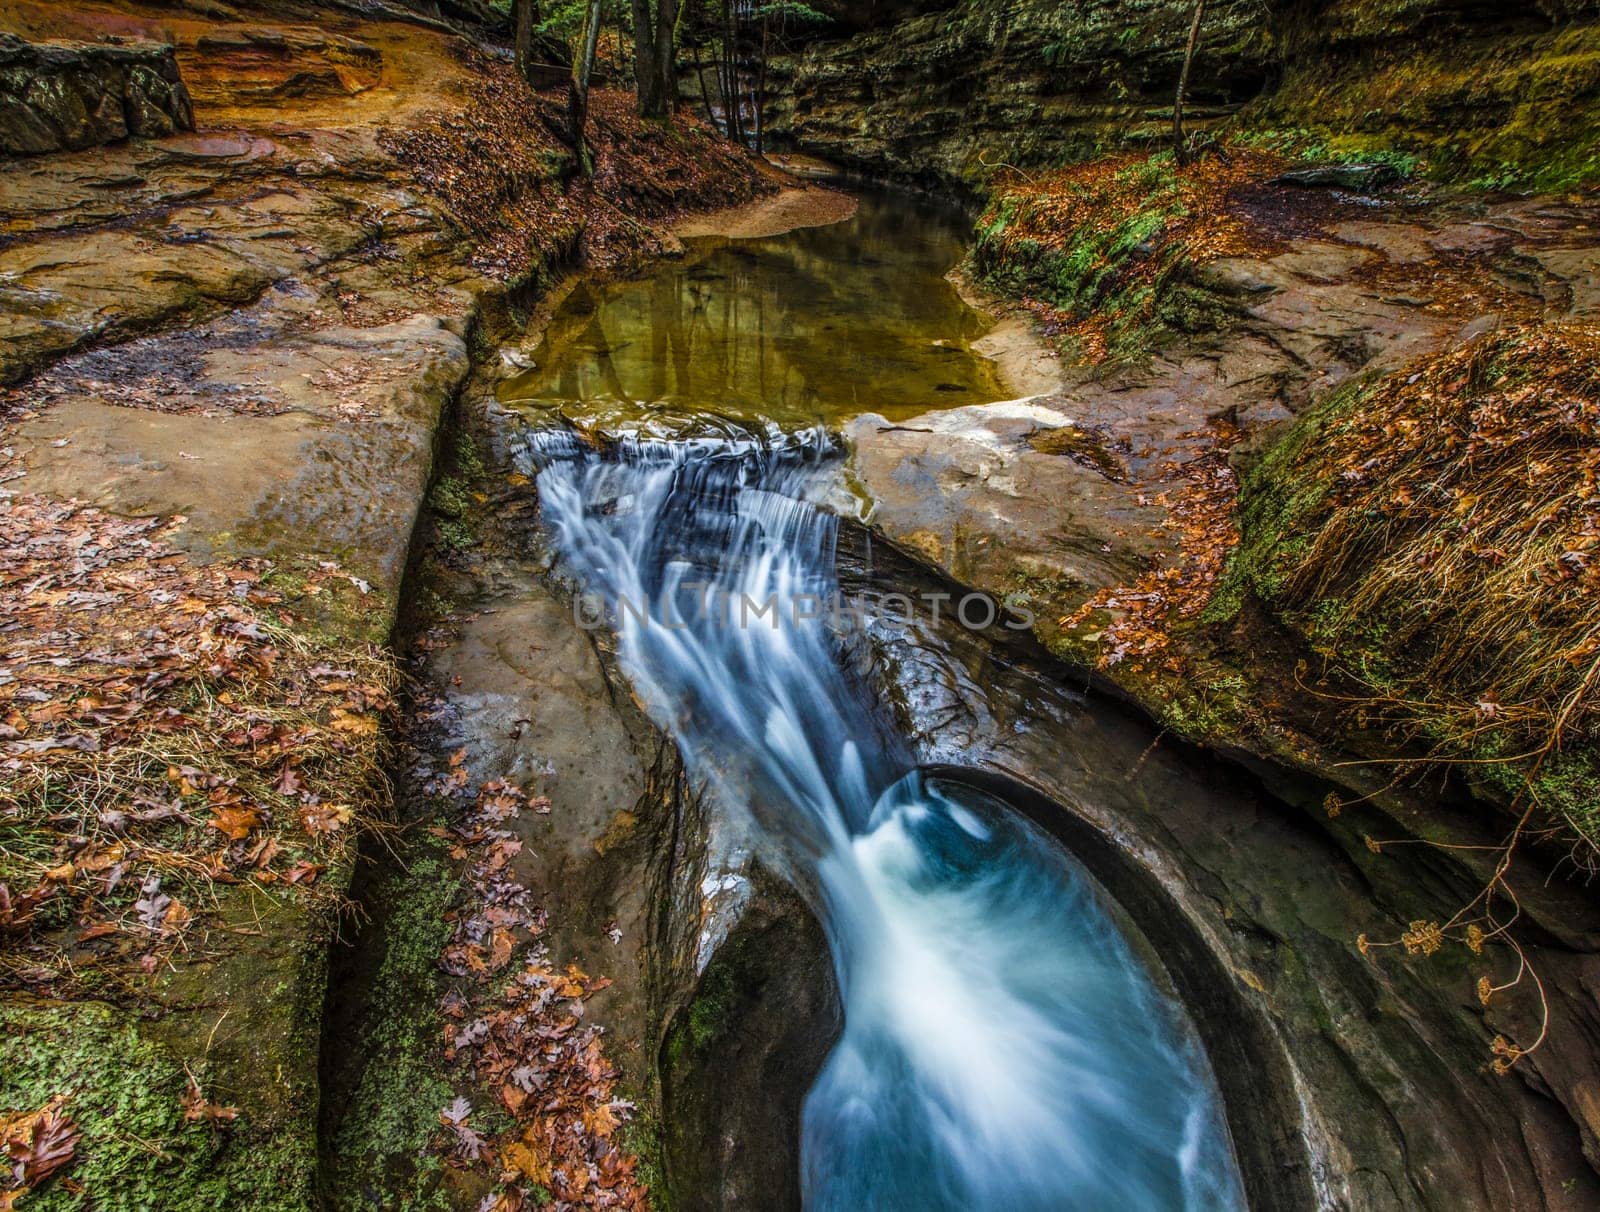 Devil's Bathtub, Old Man's Cave, Hocking Hills State Park, Ohio by Txs635